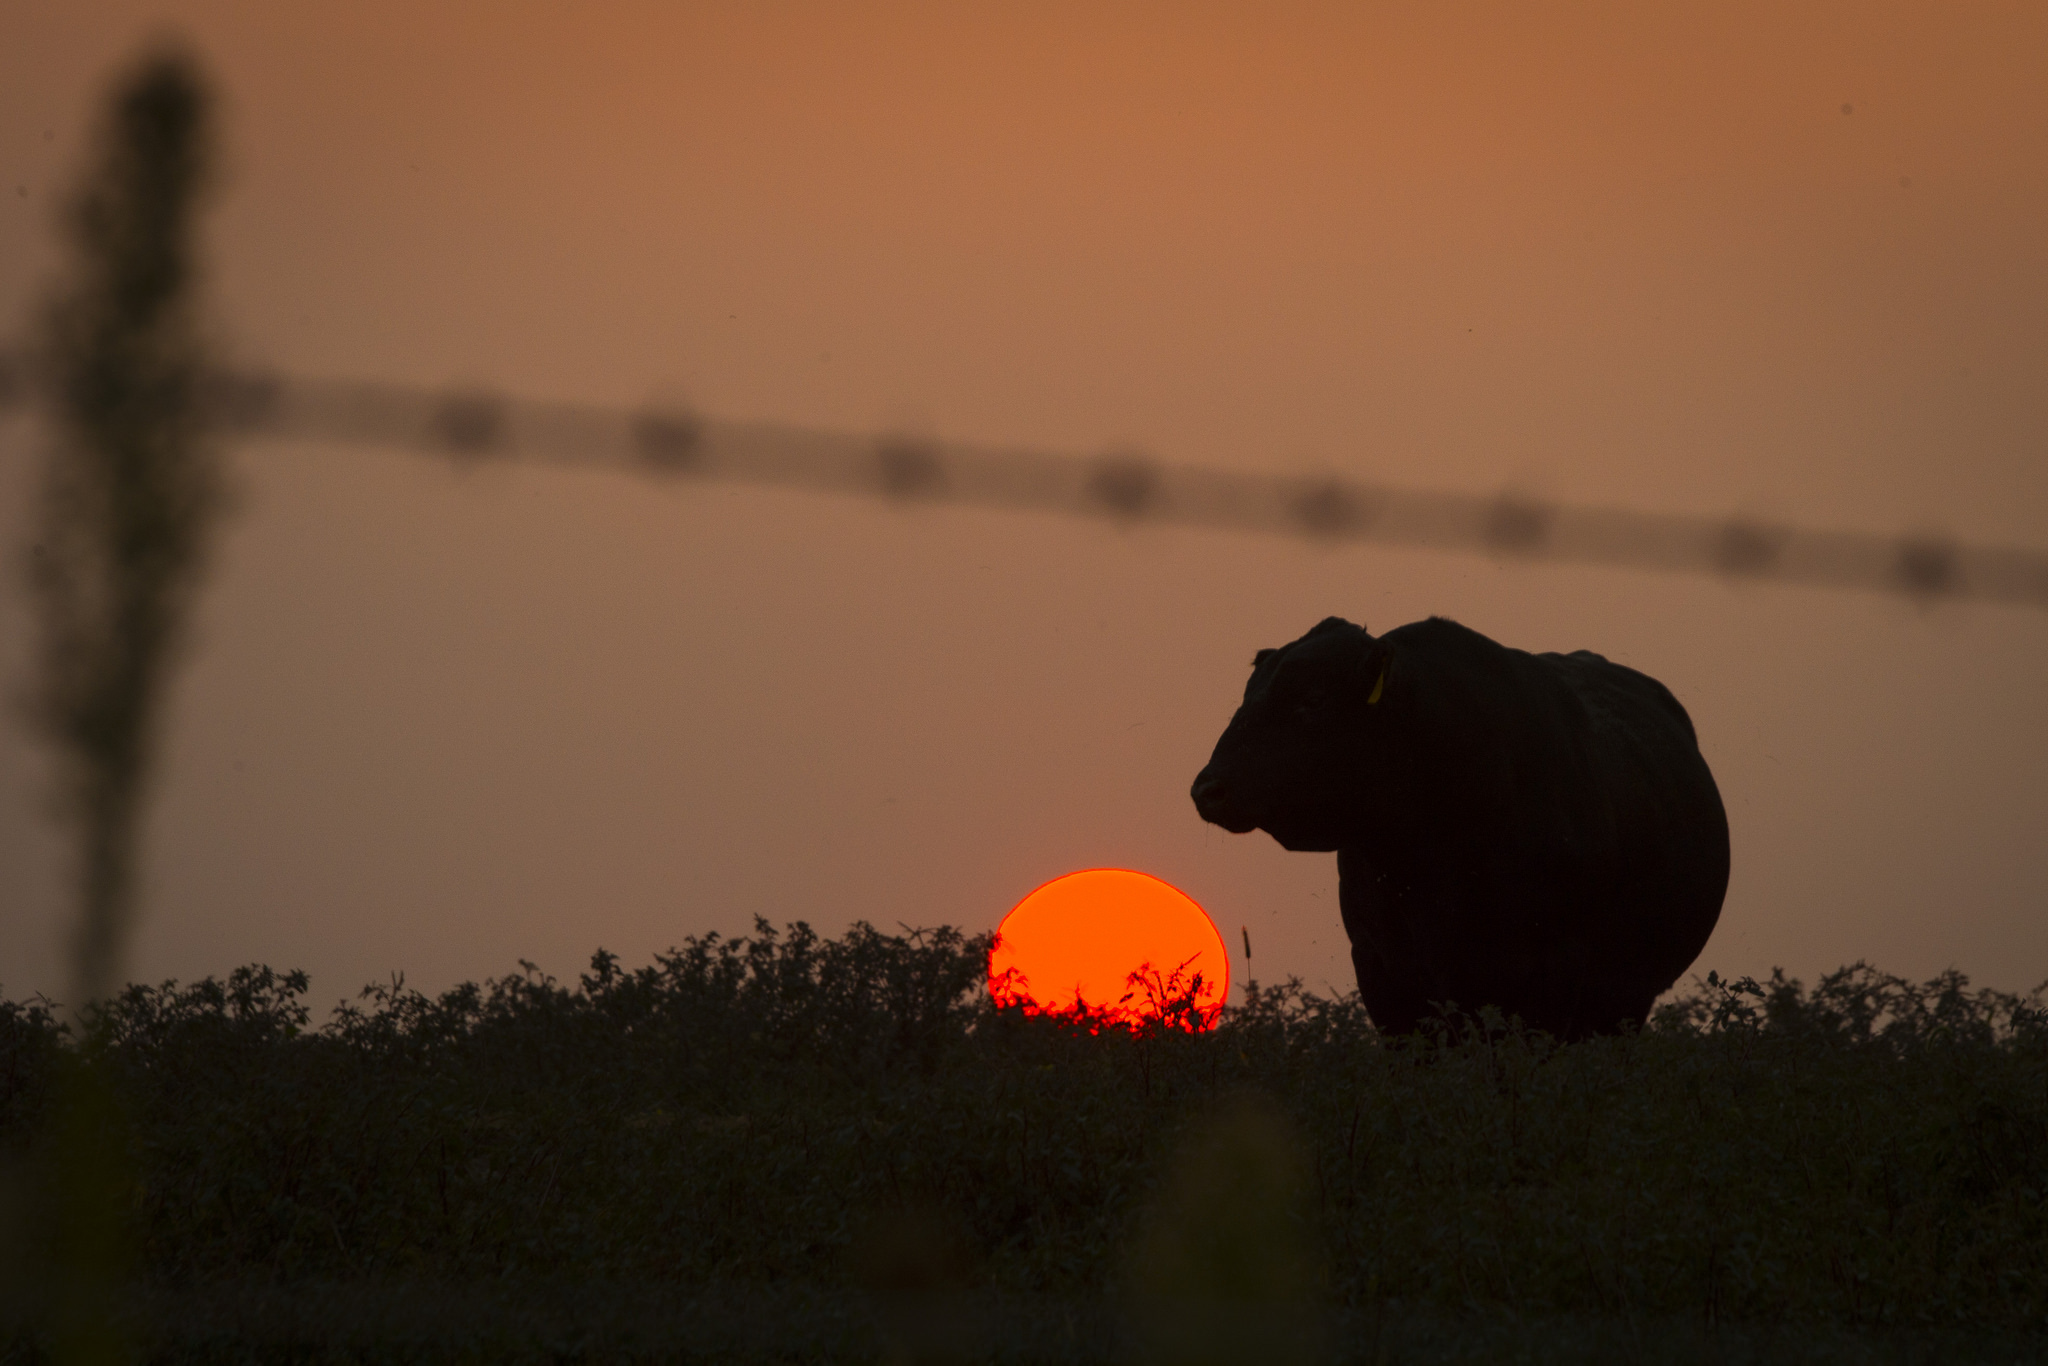 Silhouette of a bull grazing in a pasture at sunset.